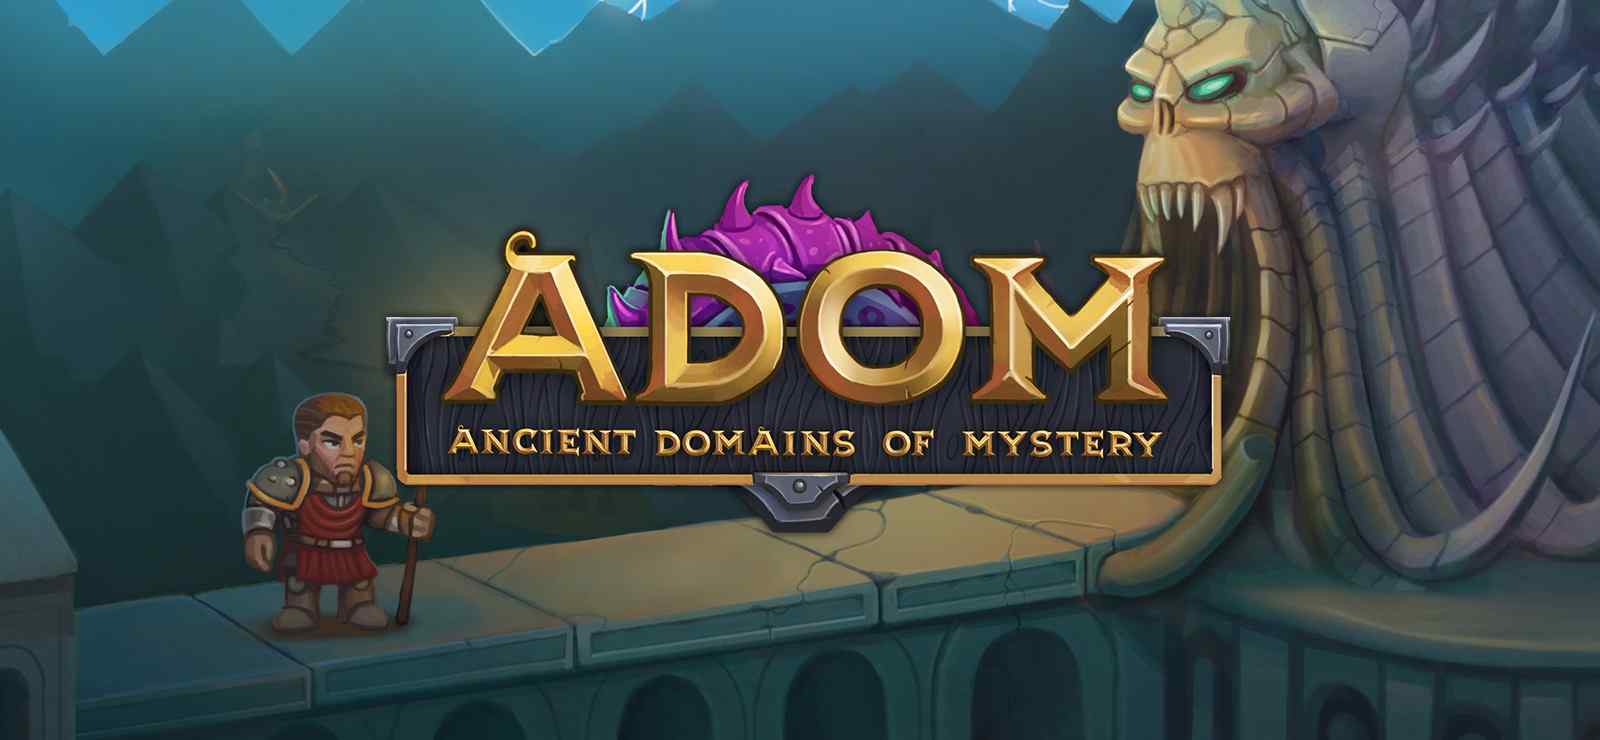 Ancient Domains of Mystery, or ADOM, was written by Thomas Biskup and came out in 1994.